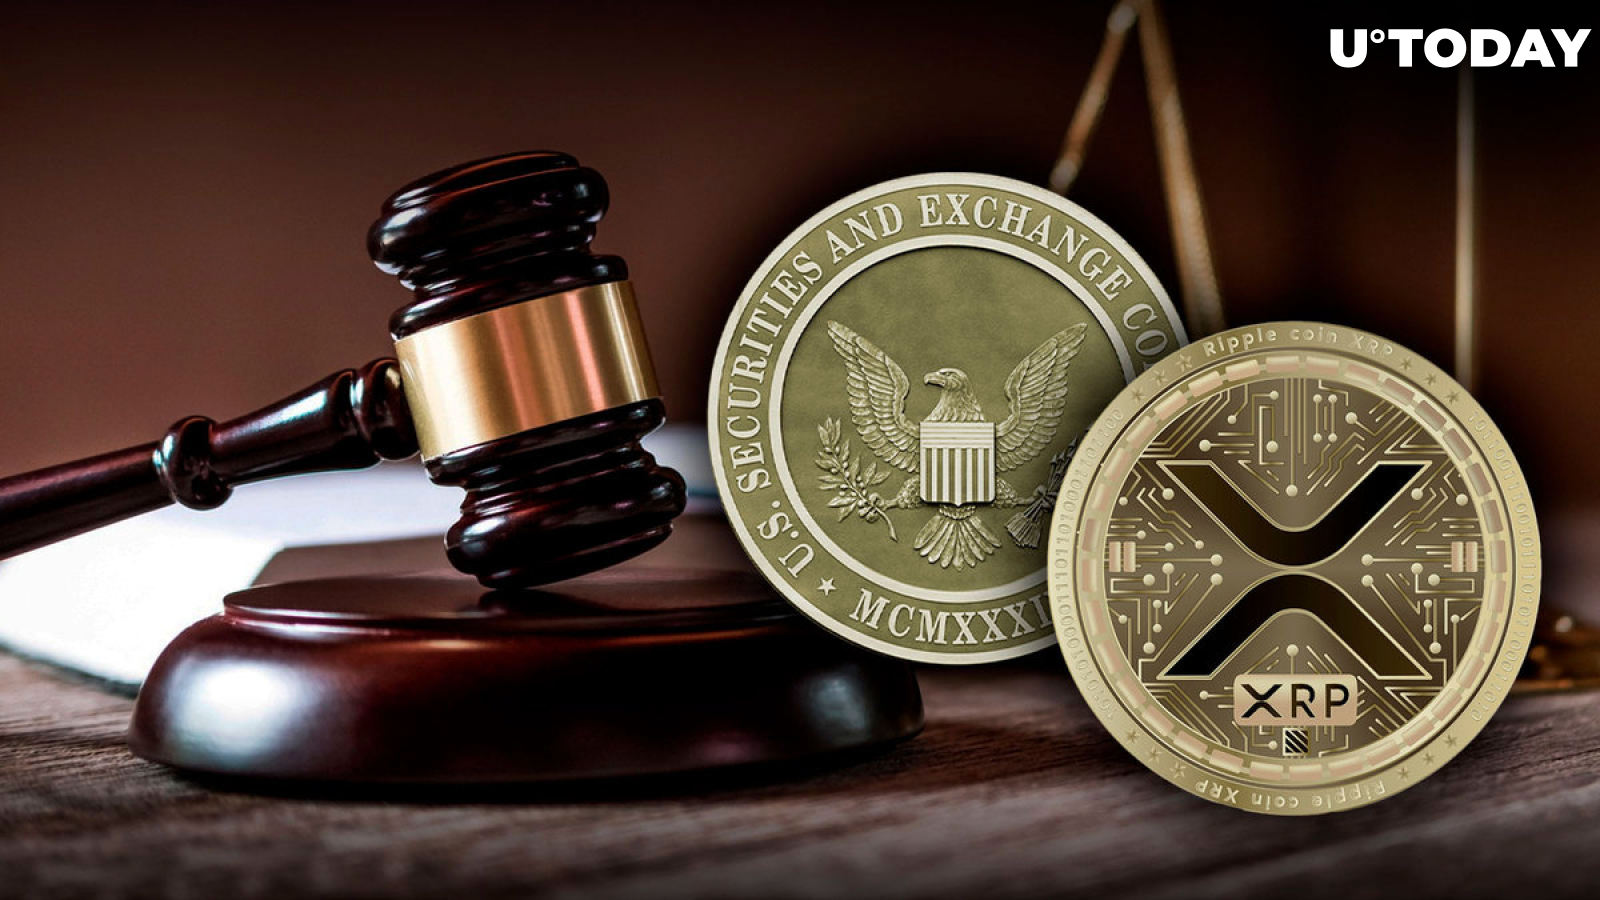 XRP Holders' Lawyer Reveals How Firms Should Deal With SEC